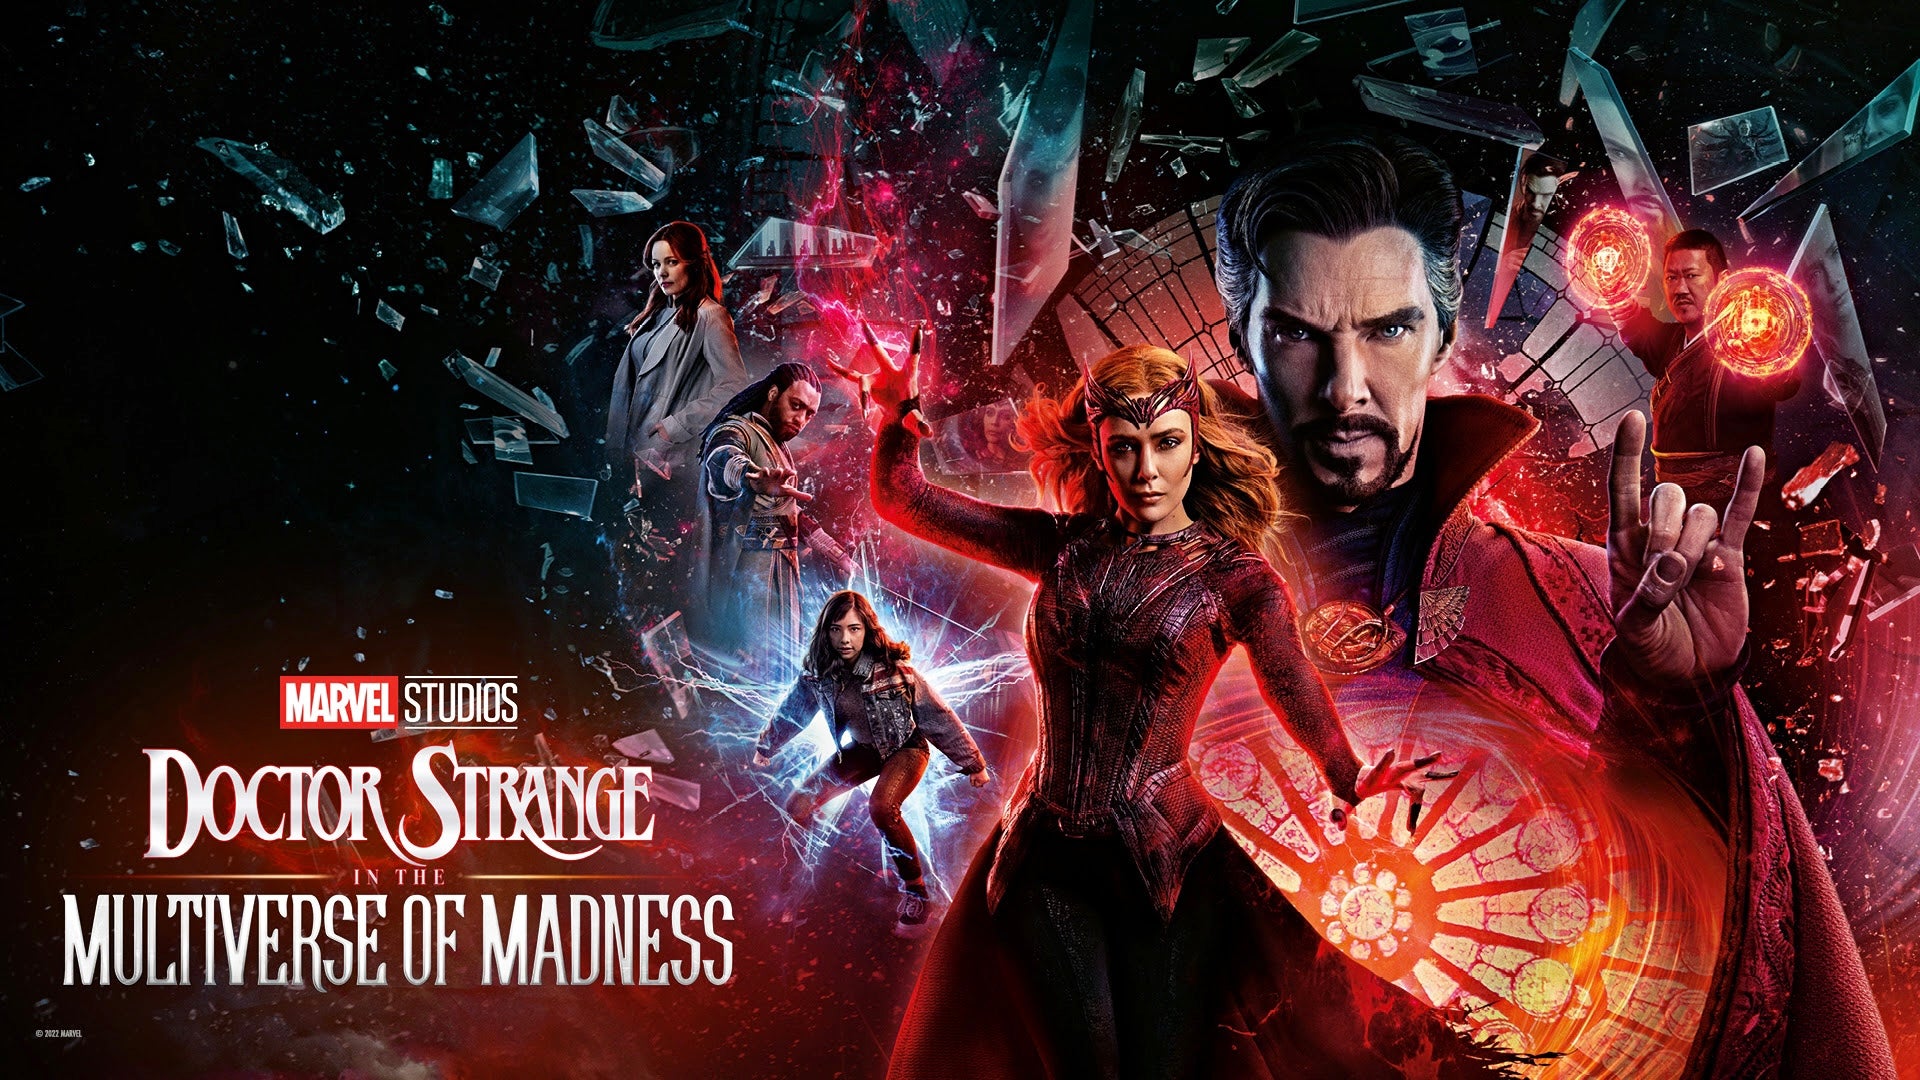 Doctor strange of the Multiverse of madness